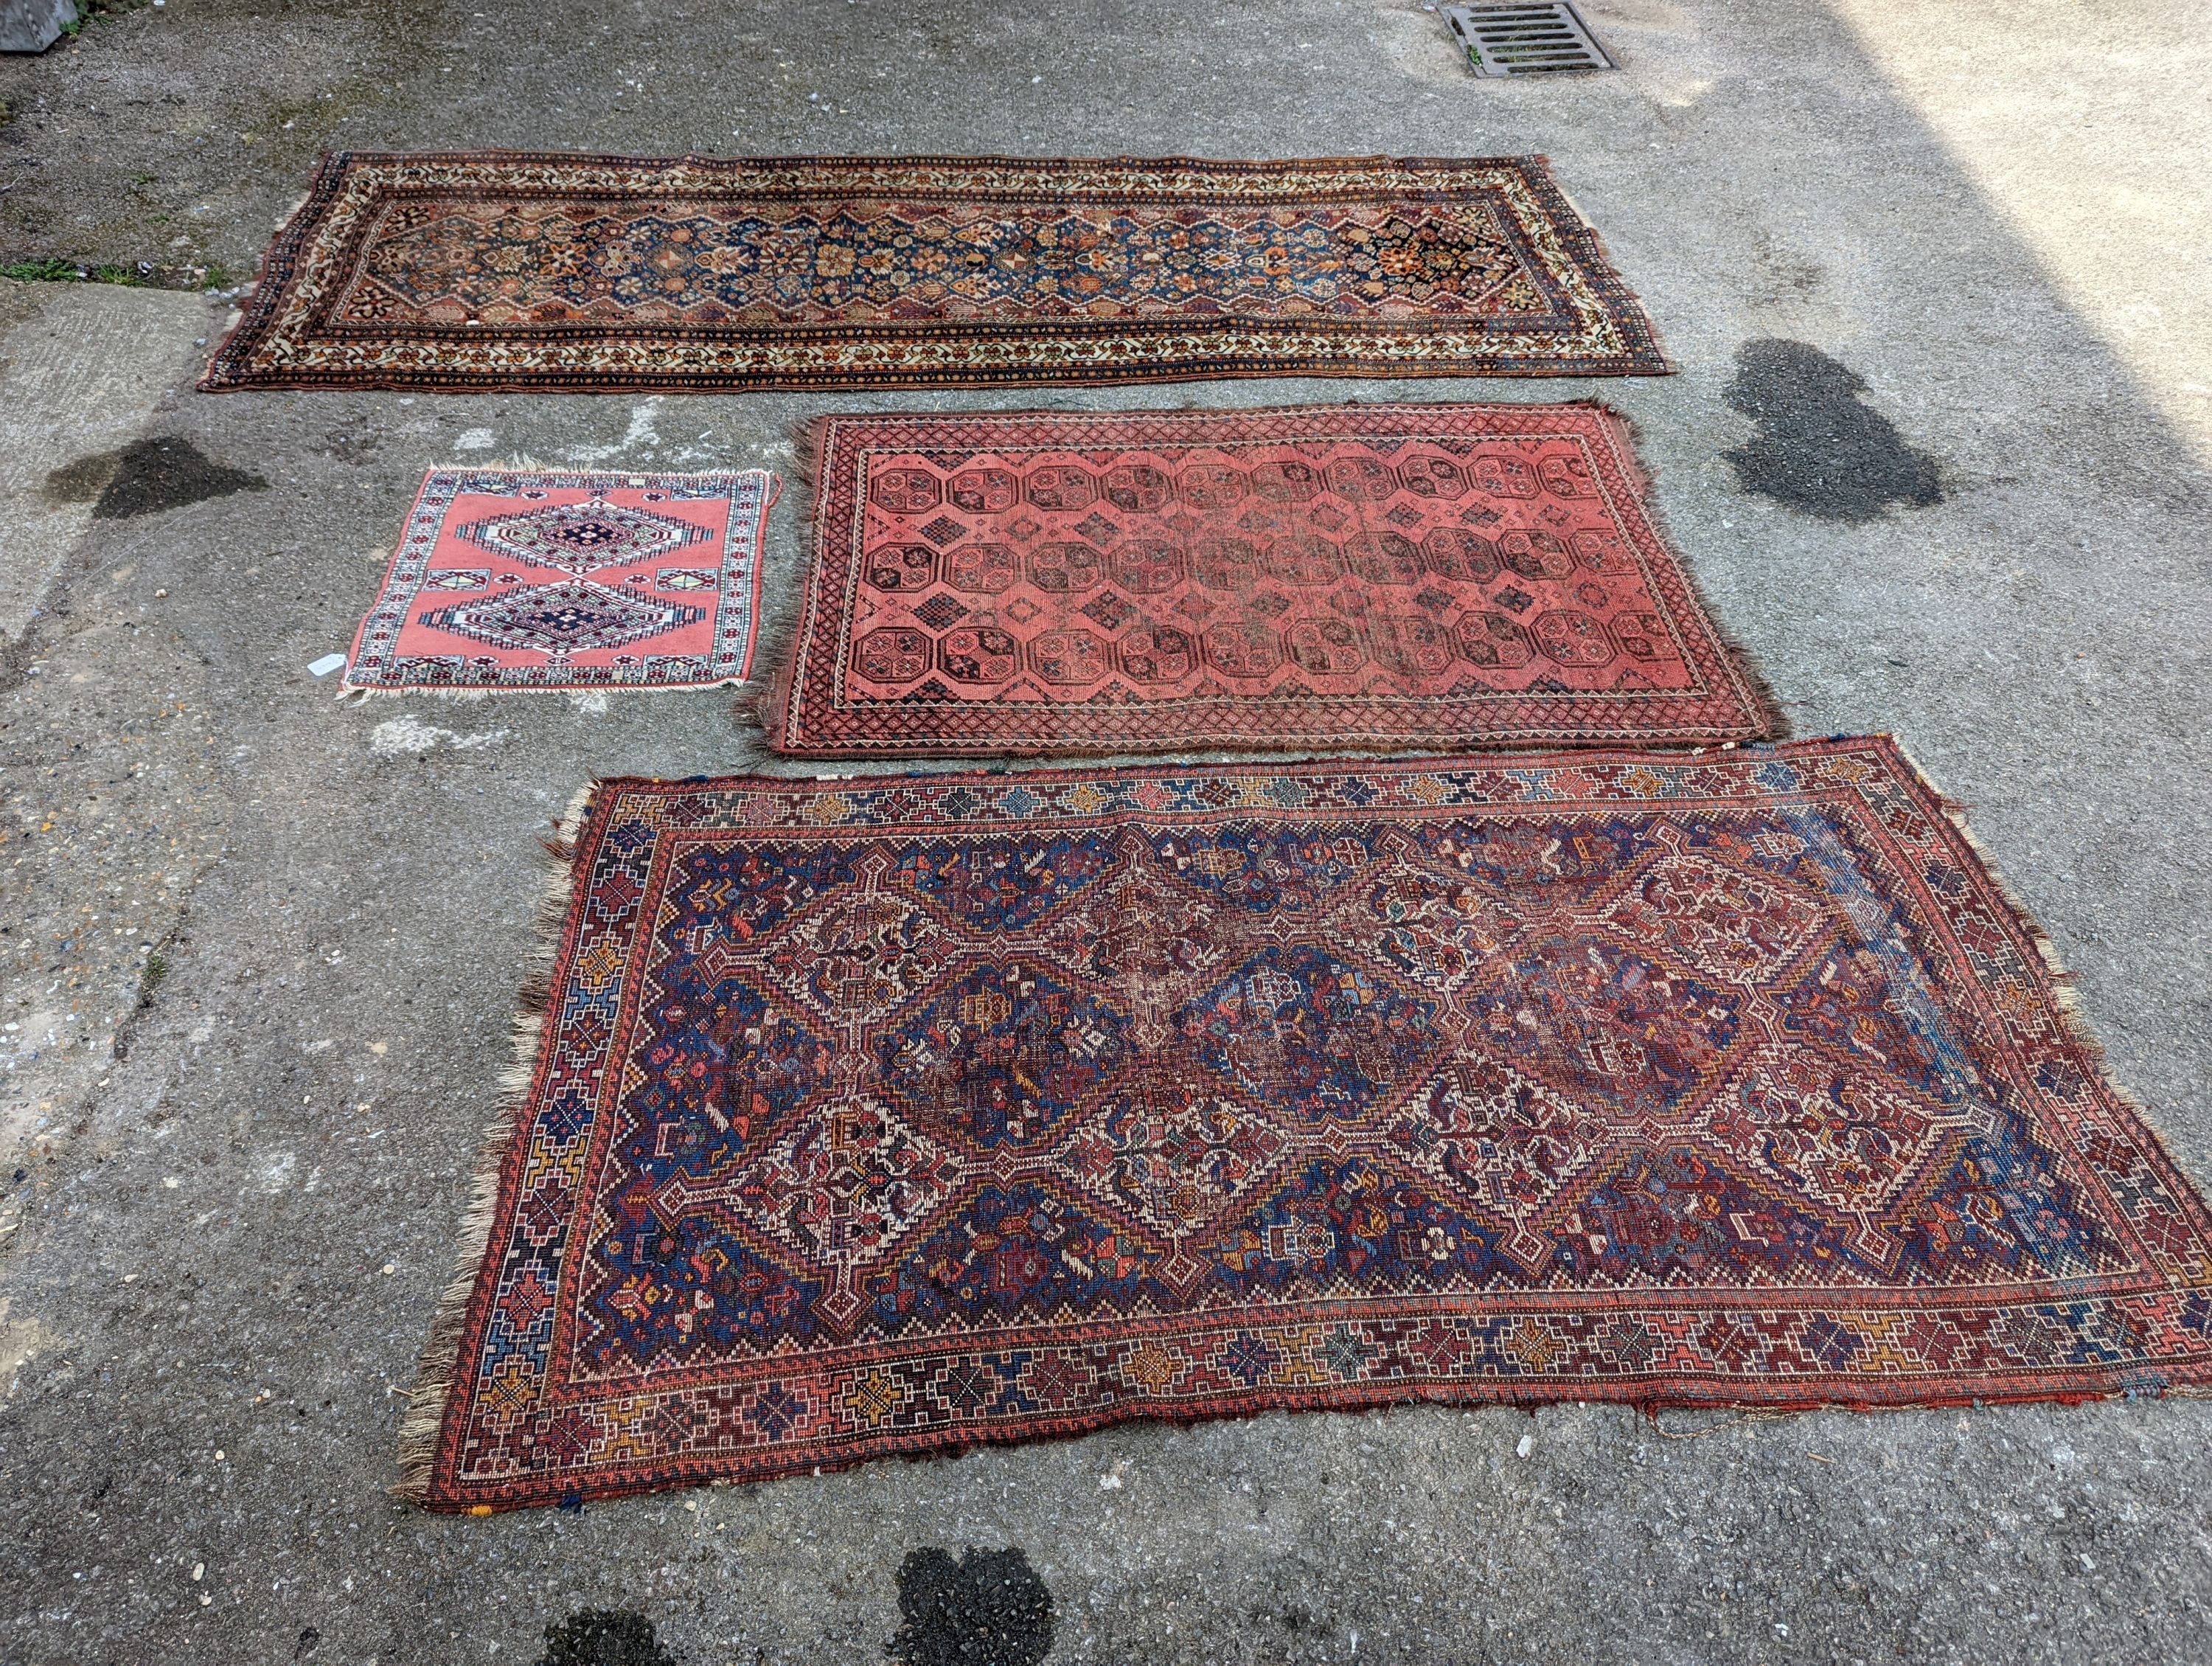 A North West Persian blue ground runner, 300 x 109 (worn and holed) a North West Persian rug, Bohara